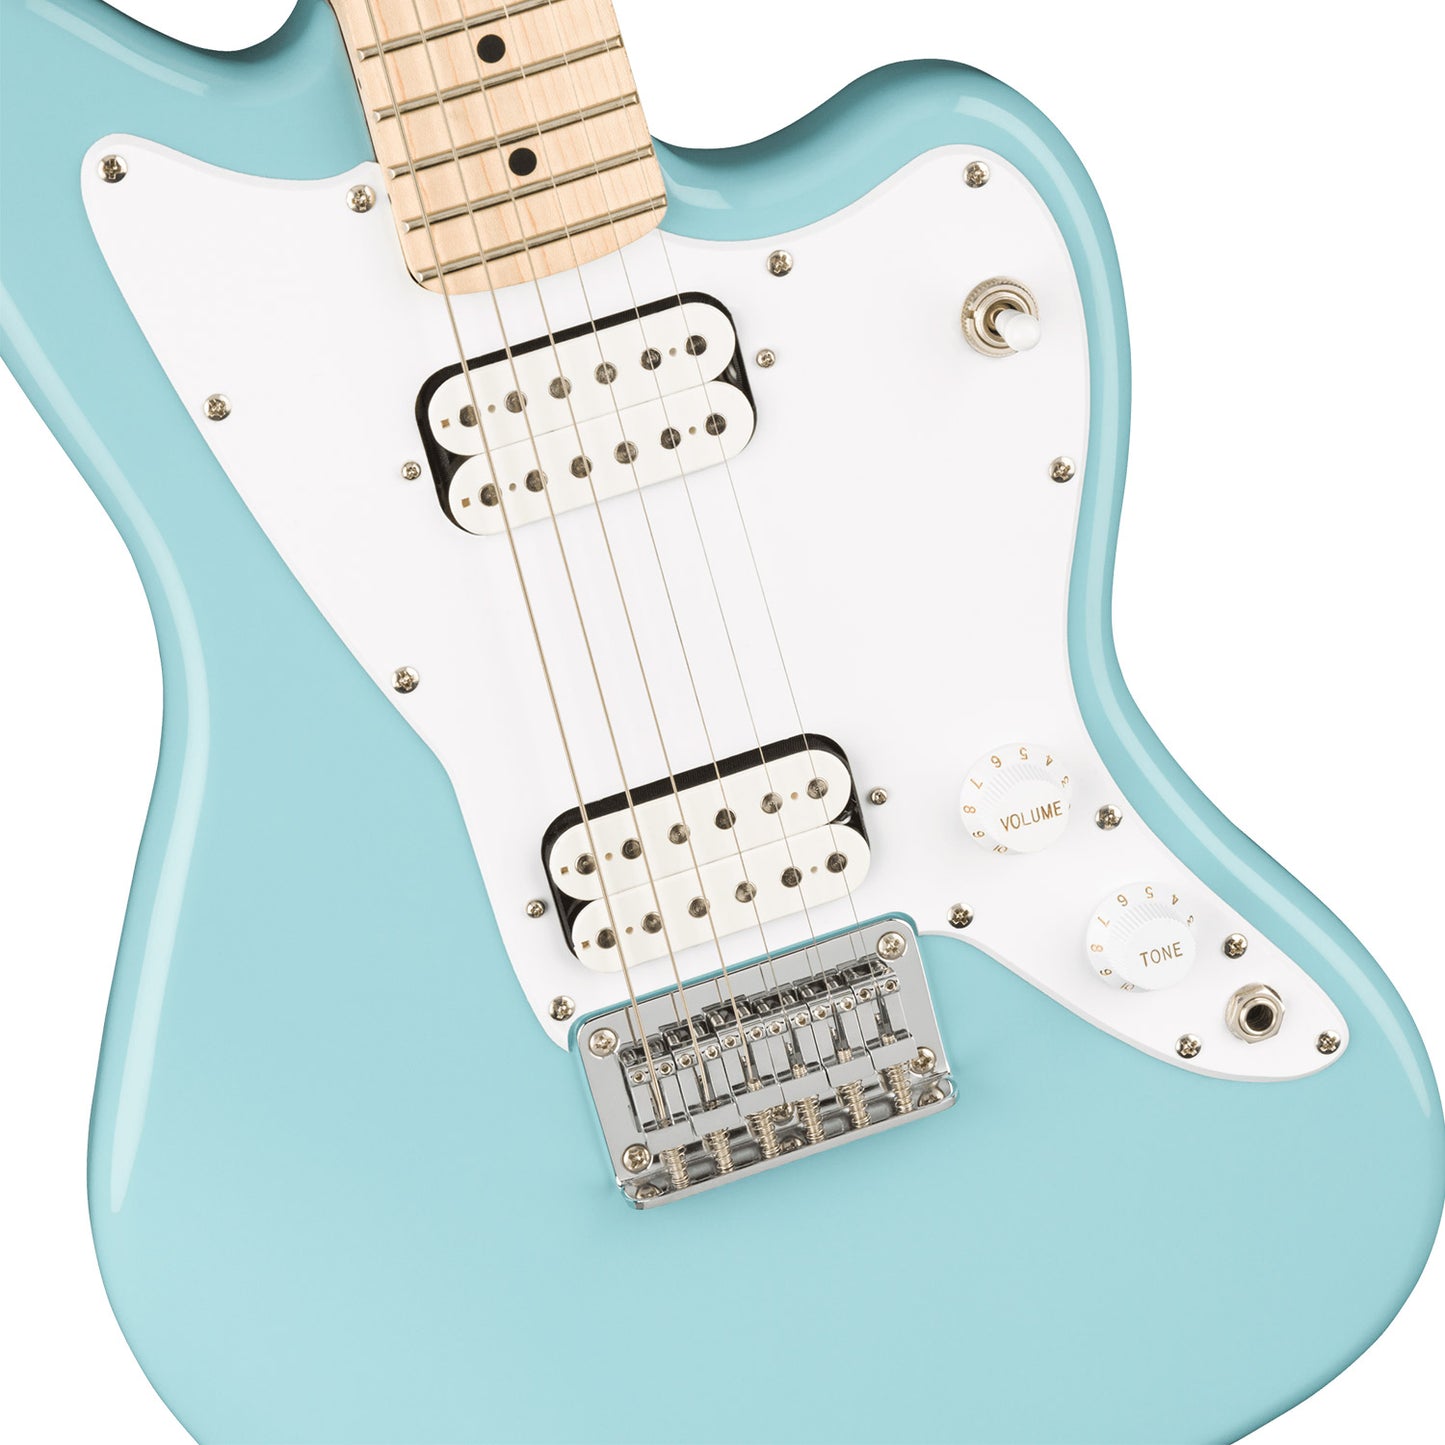 Squier by Fender Mini Jazzmaster® HH in Various Colors